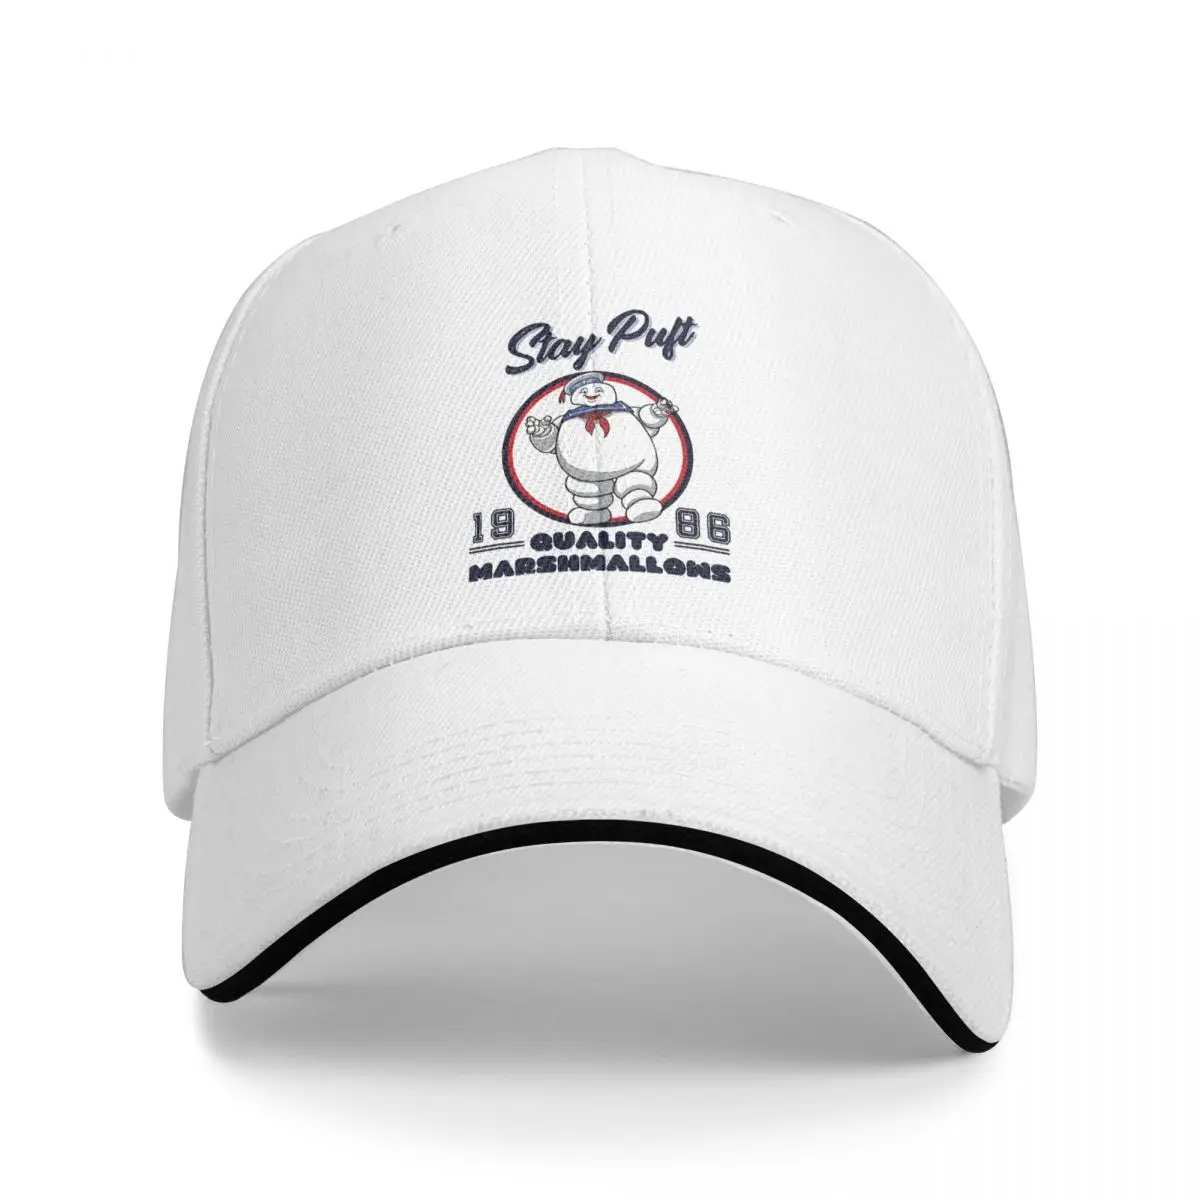 

Stay Puft Quality Marshmallows Ghostbuster-s Horror Film Multicolor Hat Peaked Women's Cap Personalized Visor Sunprotection Hats